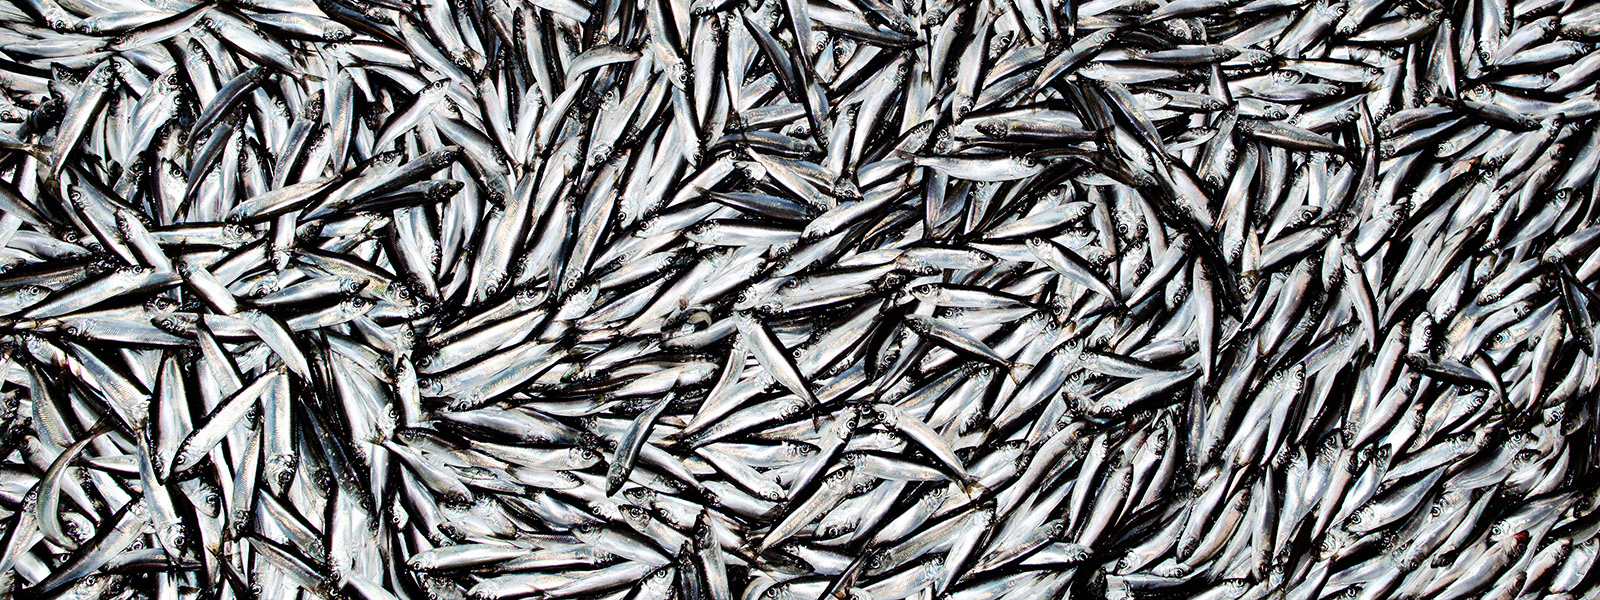 Overfishing by industrial fisheries must be tackled, says